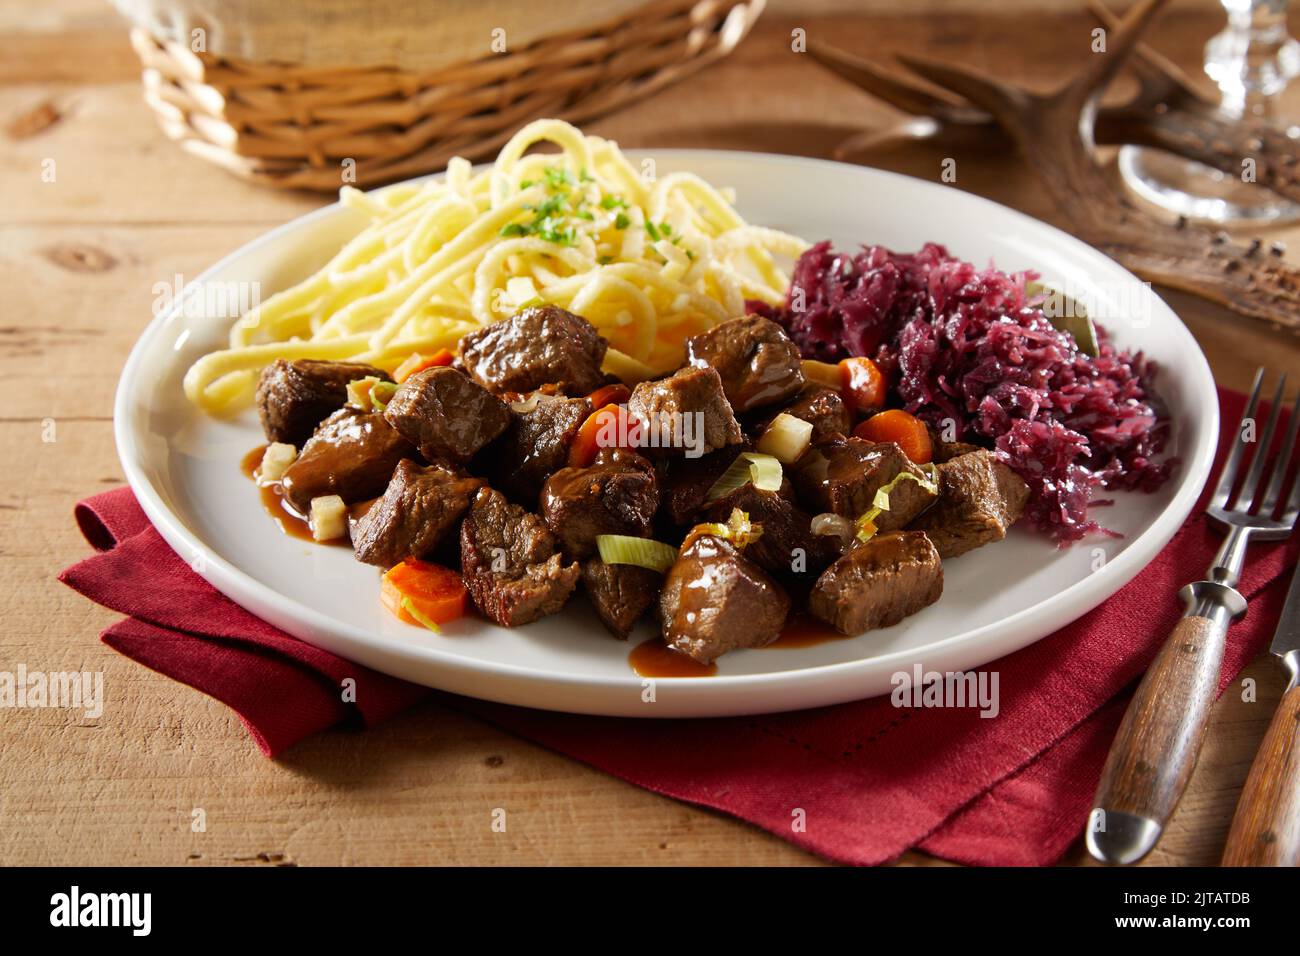 From above delicious beef goulash served on plate with spatzle pasta and red cabbage sauerkraut during lunch Stock Photo